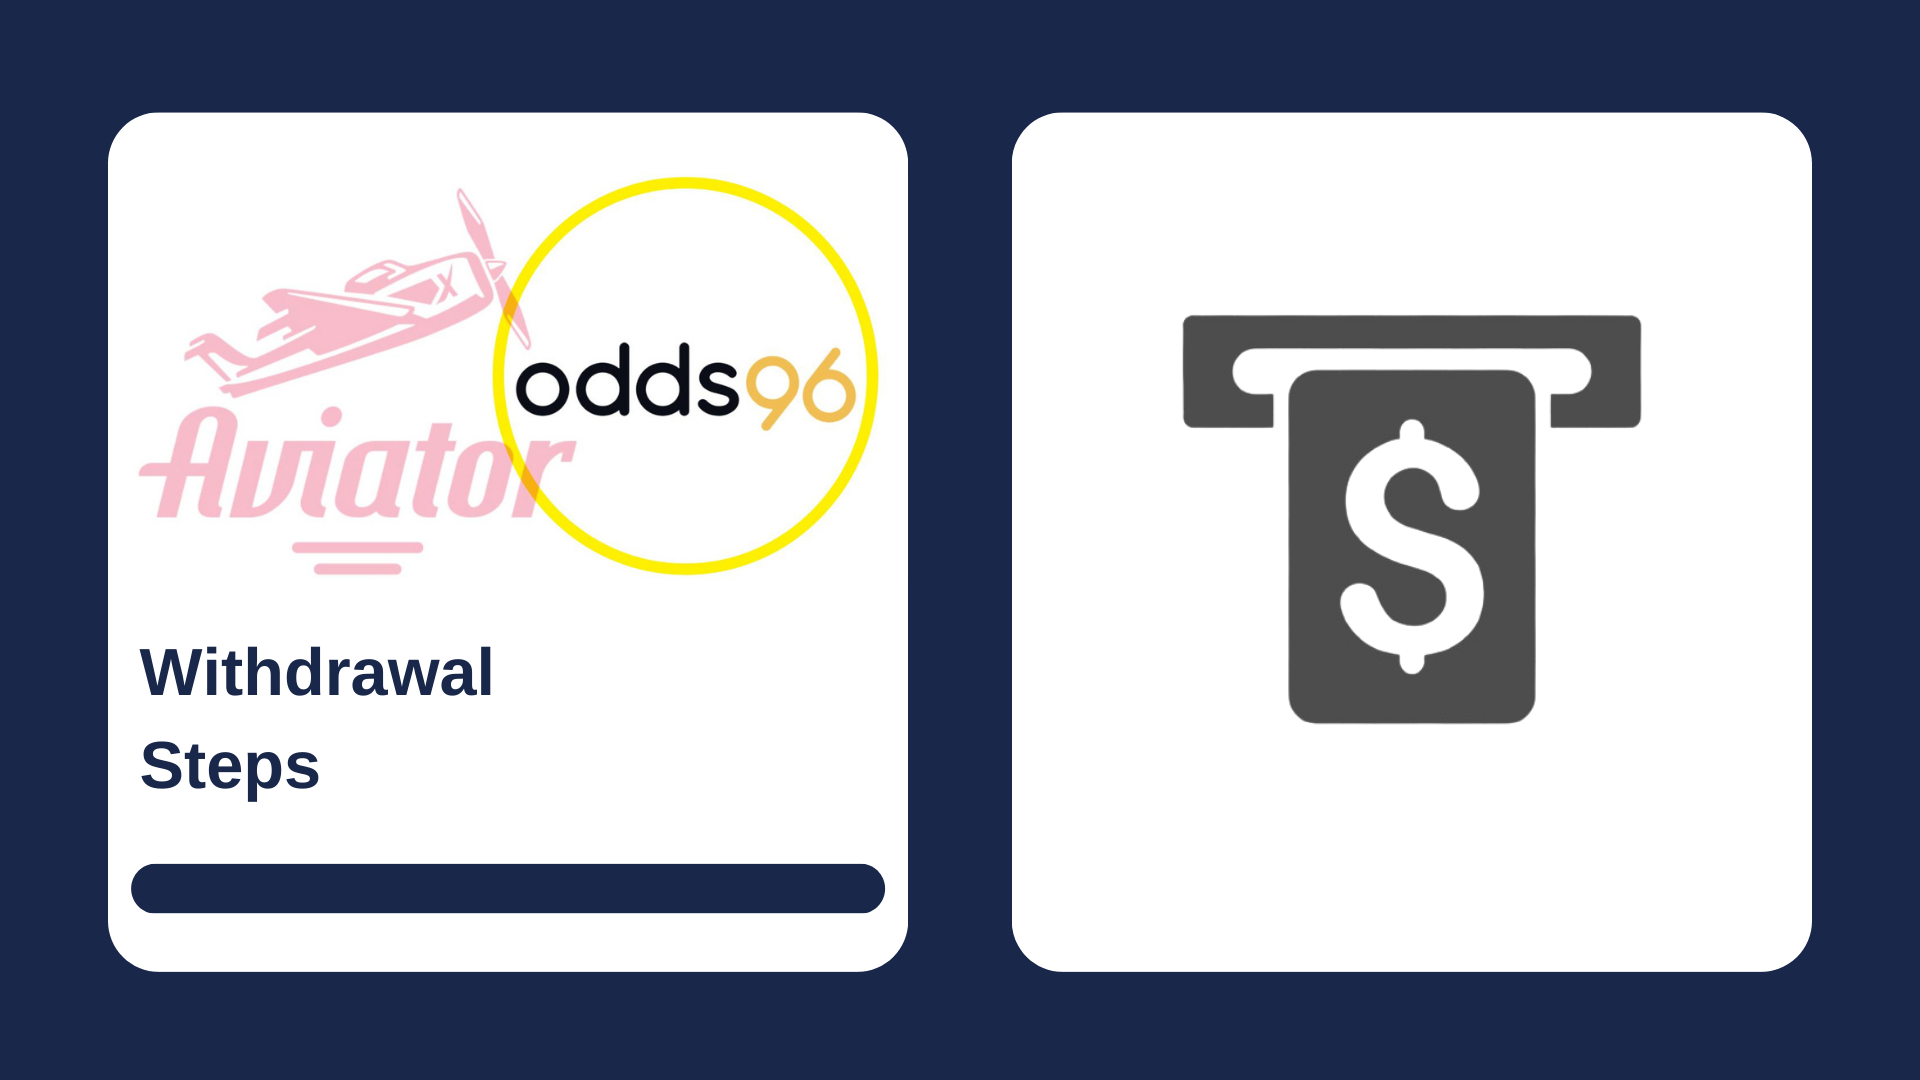 First picture showing Aviator and Odds96 logos with text, and second - withdrawal money icon